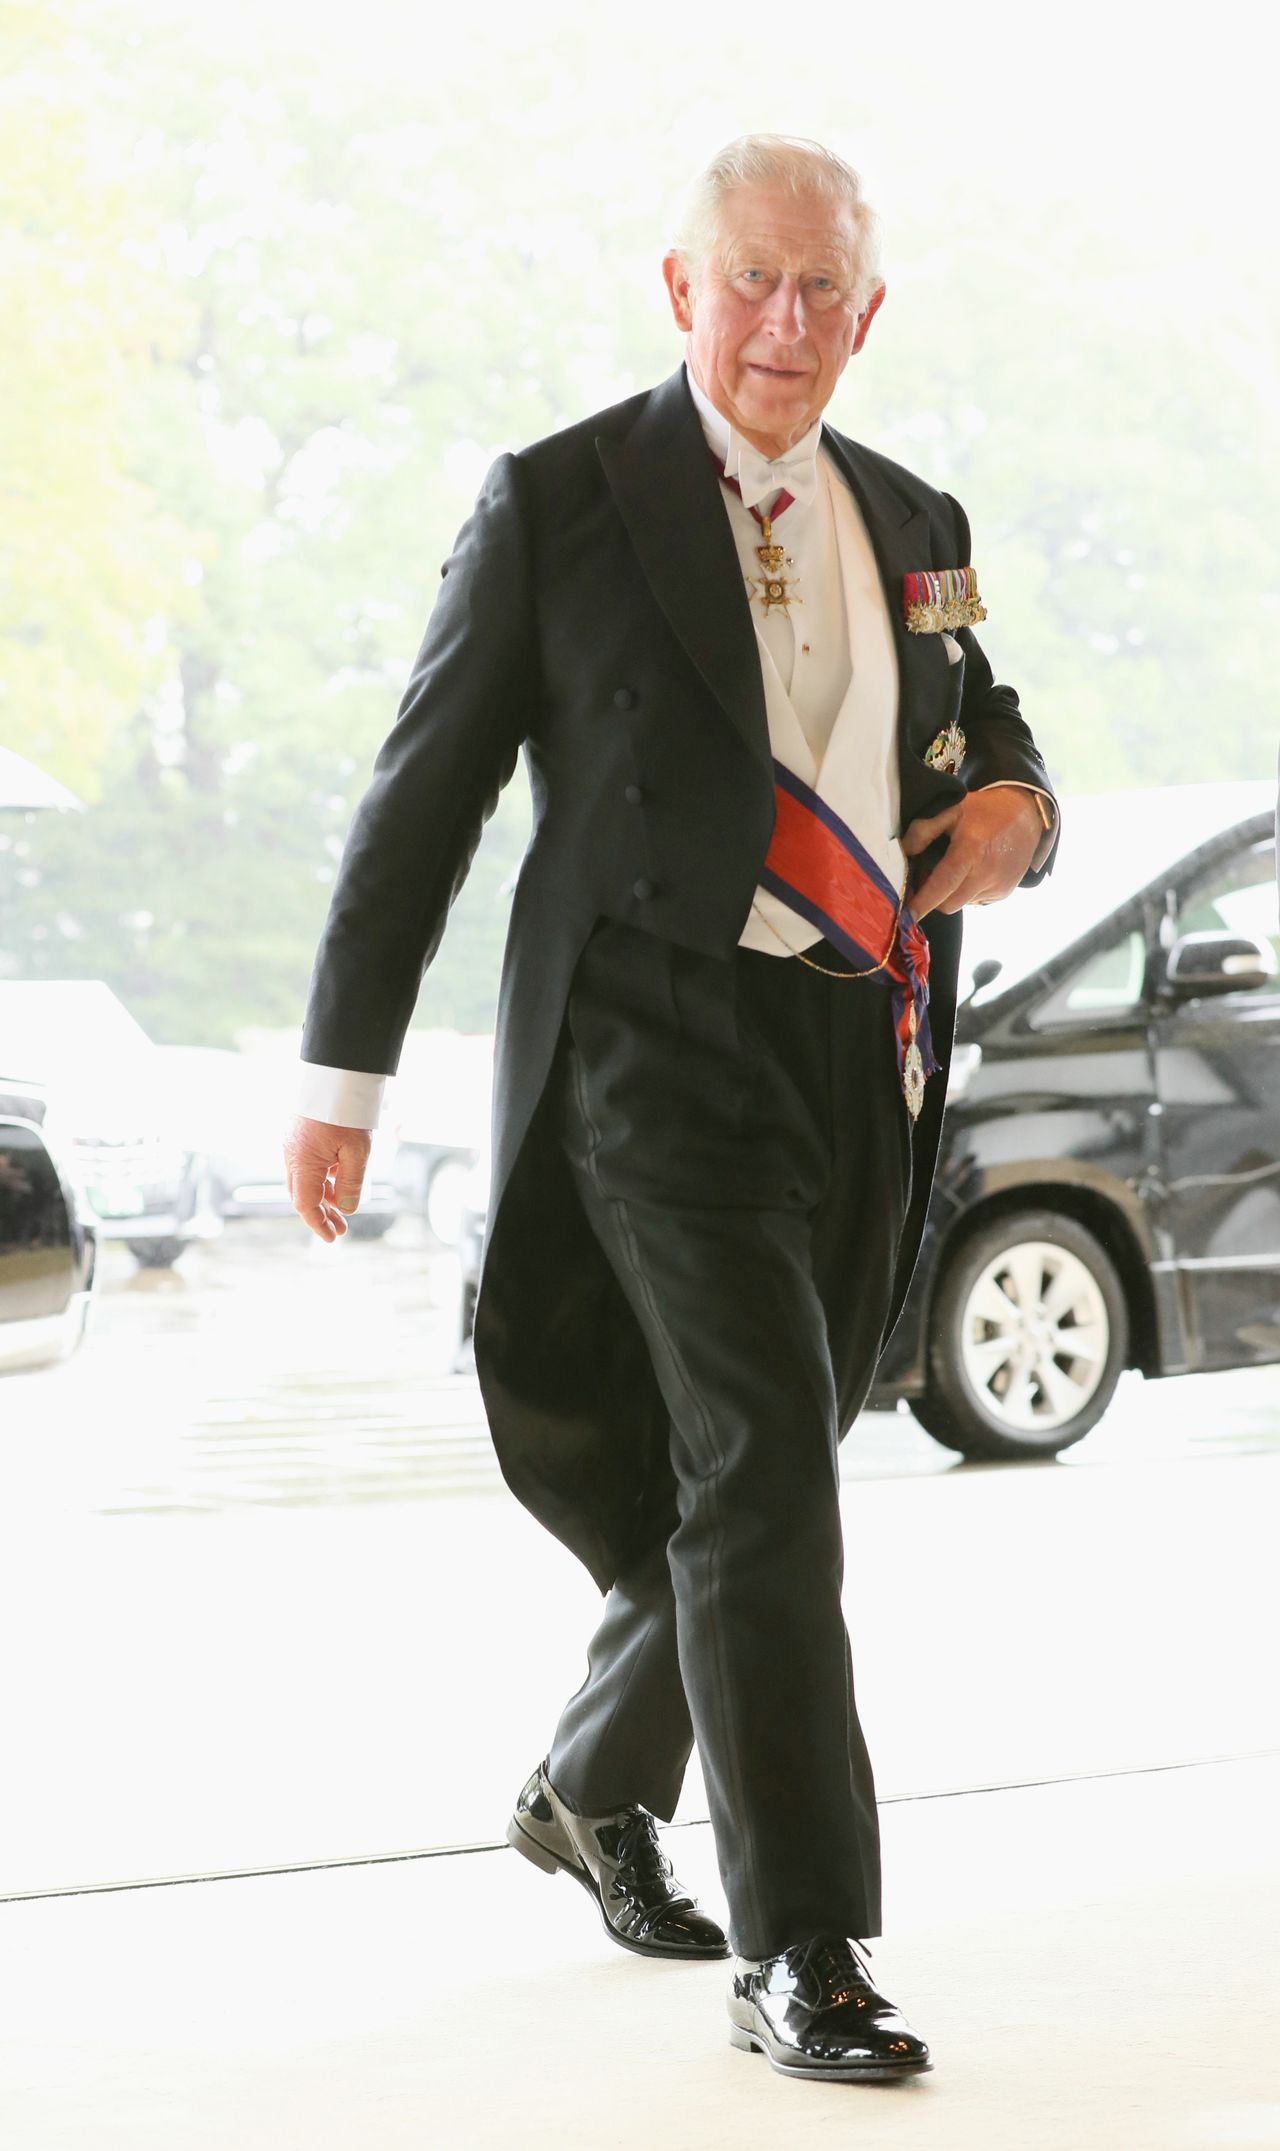 Prince Charles of Britain enters the Imperial Palace for the enthronement ceremony. (© Jiji)